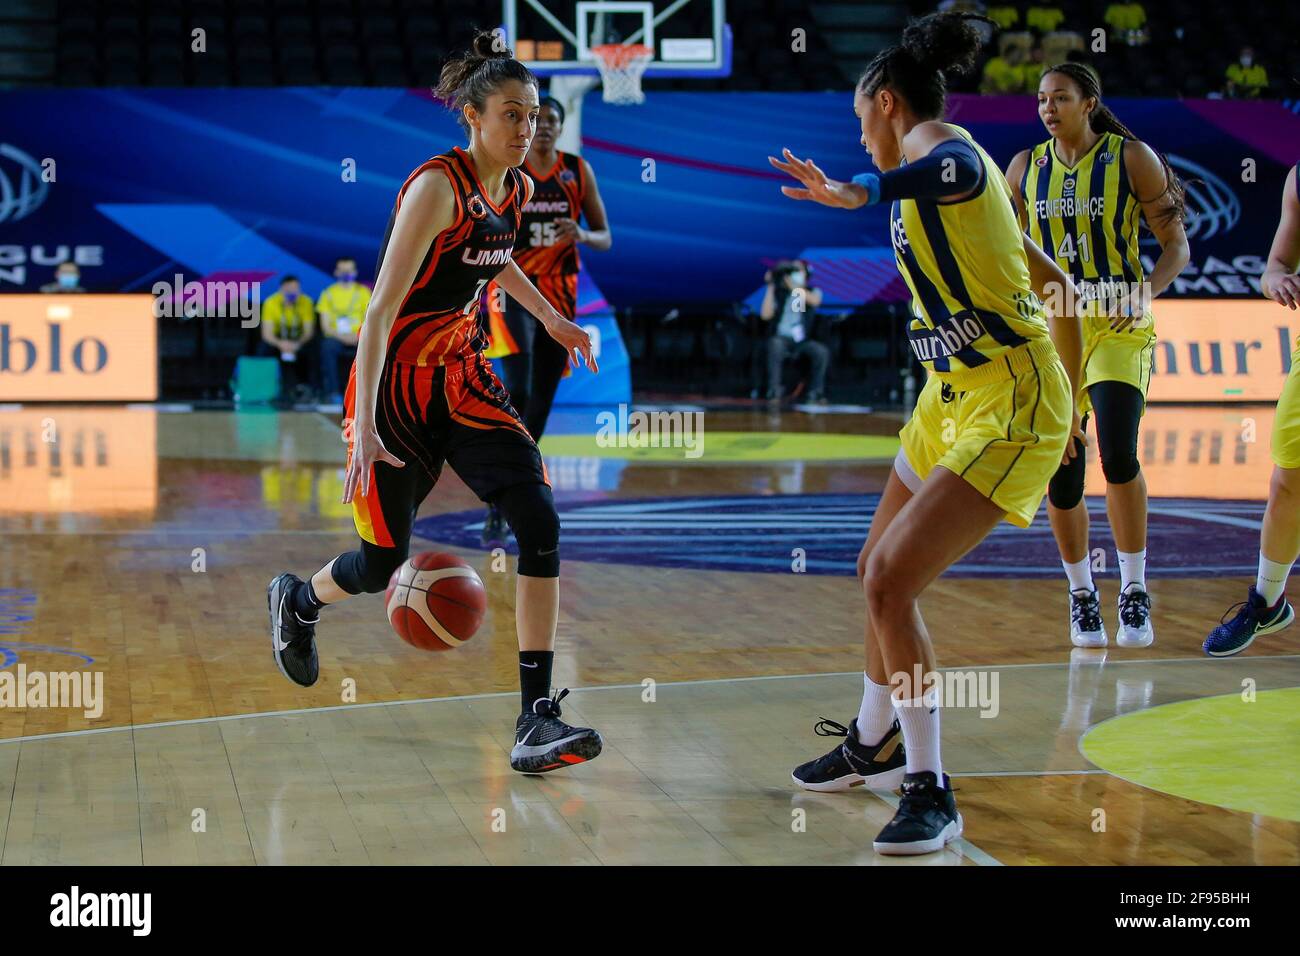 ISTANBUL, Turkey. 16th Apr, 2021: Basketbal: Fenerbahce Oznur Kablo v UMMC Ekaterinburg: Istanboel ISTANBUL, Turkey. 16th Apr, 2021. APRIL 16: Alba Torrens of UMMC Ekaterinburg during the Euroleague Women Final Four match between Fenerbahce Oznur Kablo and UMMC Ekaterinburg at Volkswagen Arena on April 16, 2021 in Istanbul, Turkey (Photo by /Orange Pictures) Credit: Orange Pics BV/Alamy Live News Stock Photo